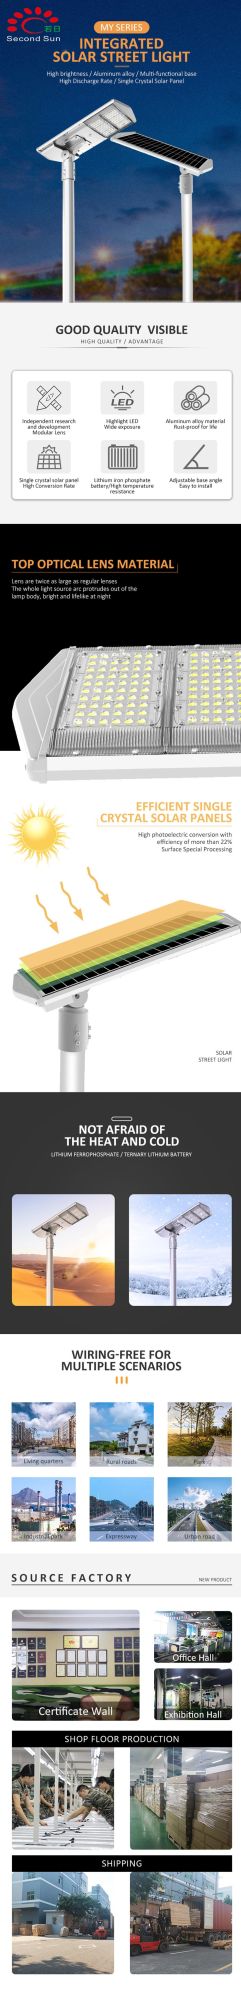 IP 66 Outdoor Waterproof All in One Integrated LED Solar Components in Metro Manila